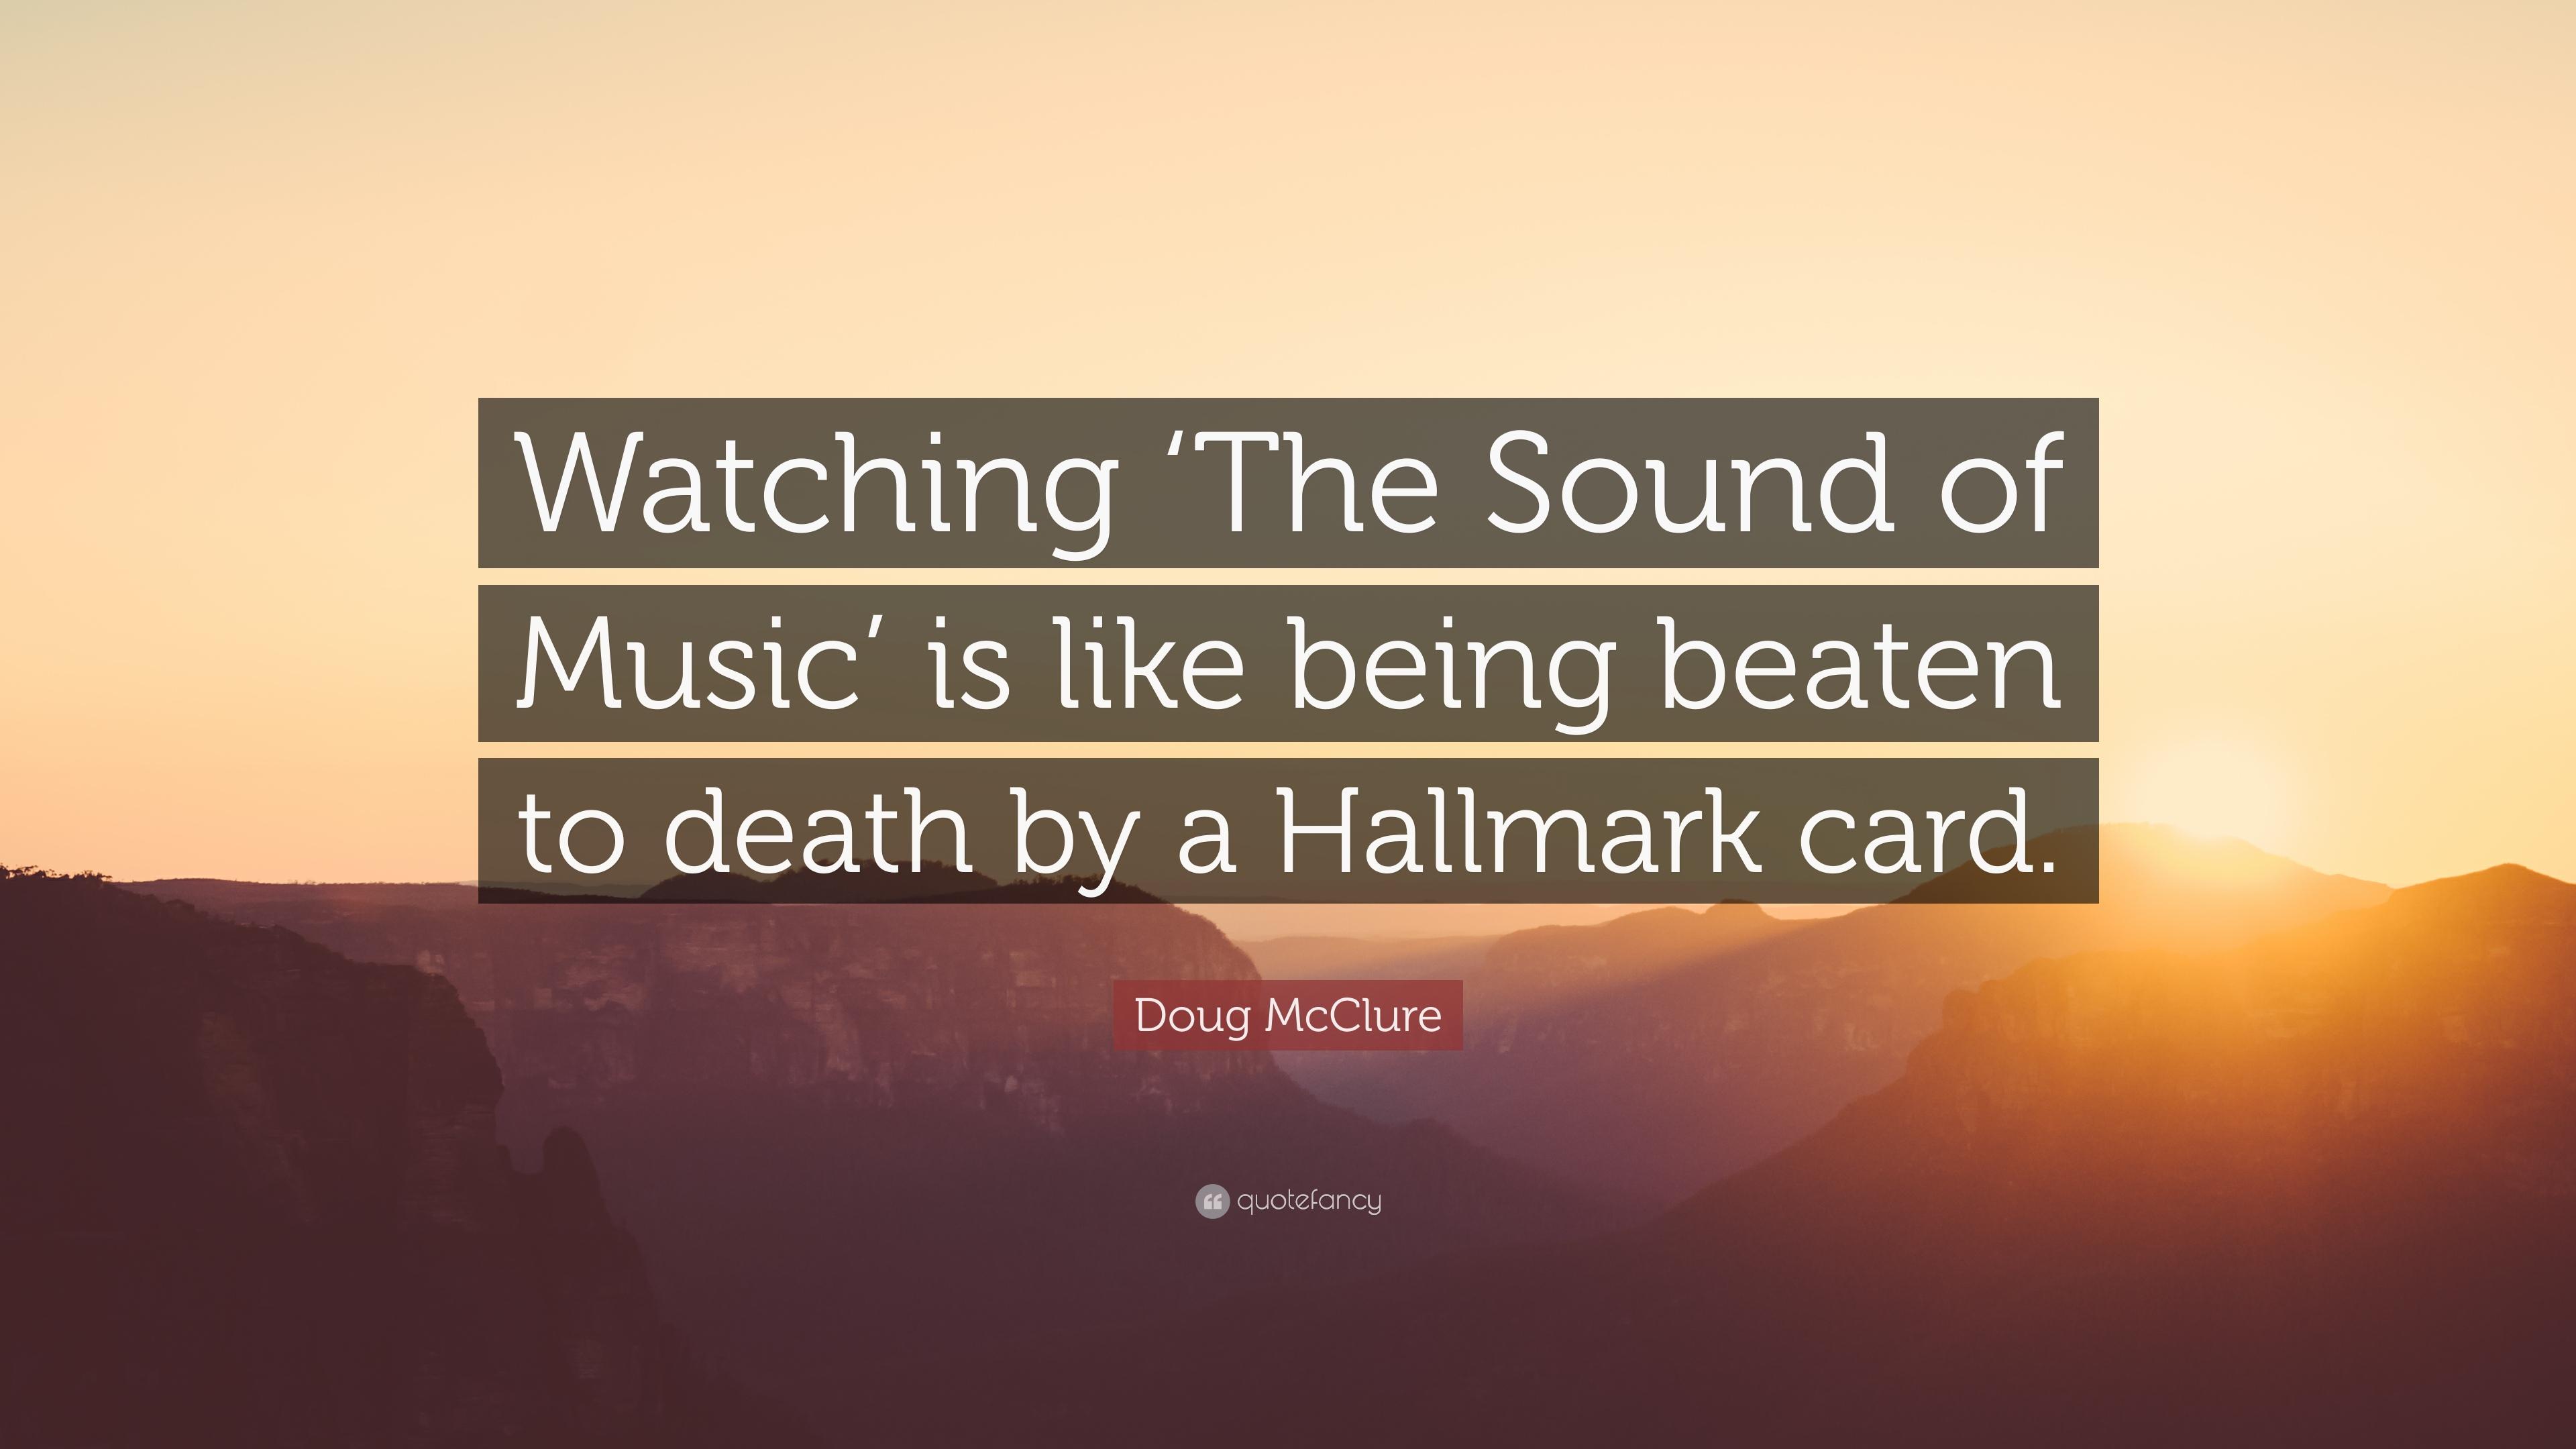 Doug McClure Quote: “Watching 'The Sound of Music' is like being